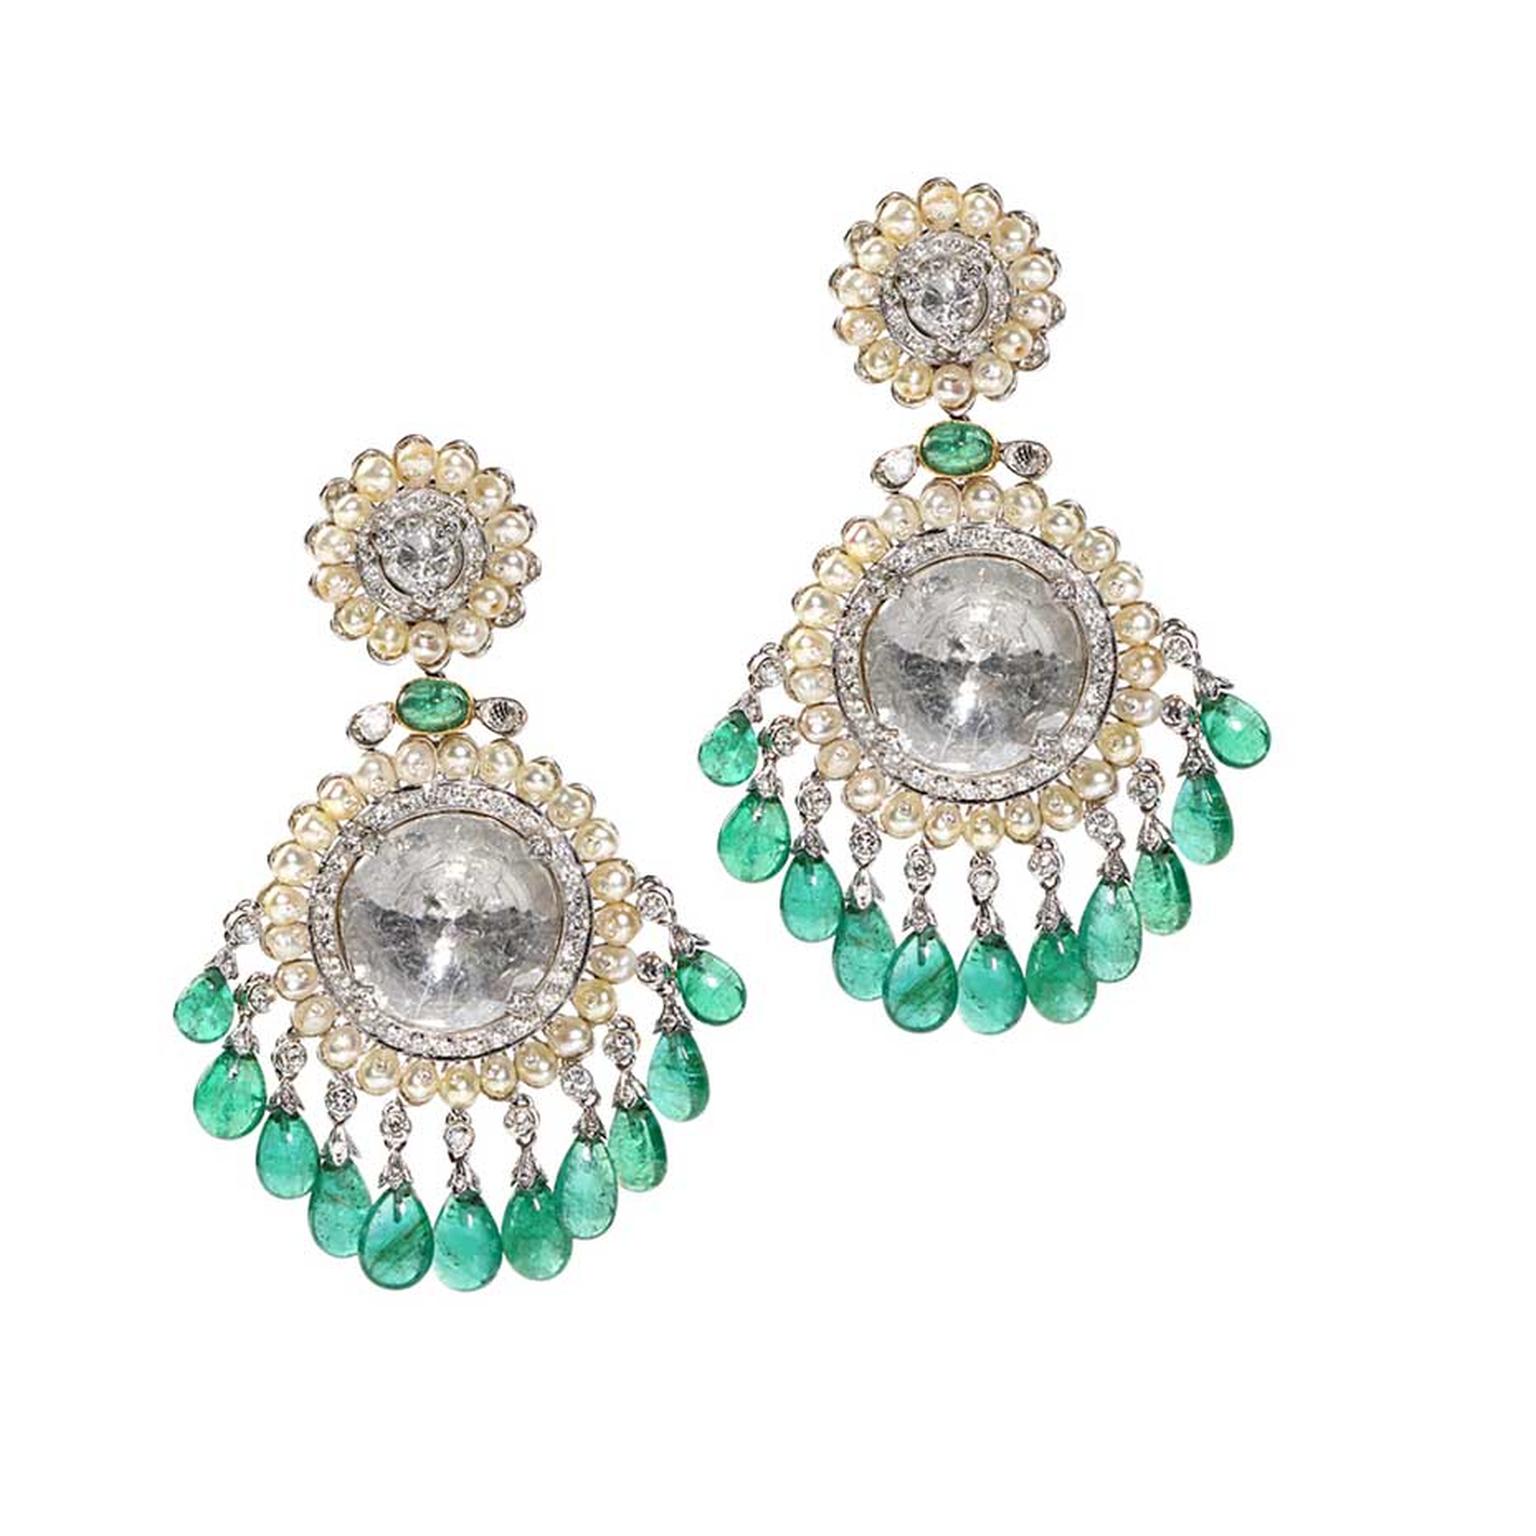 Golecha Chandelier earrings featuring emeralds, pearls and